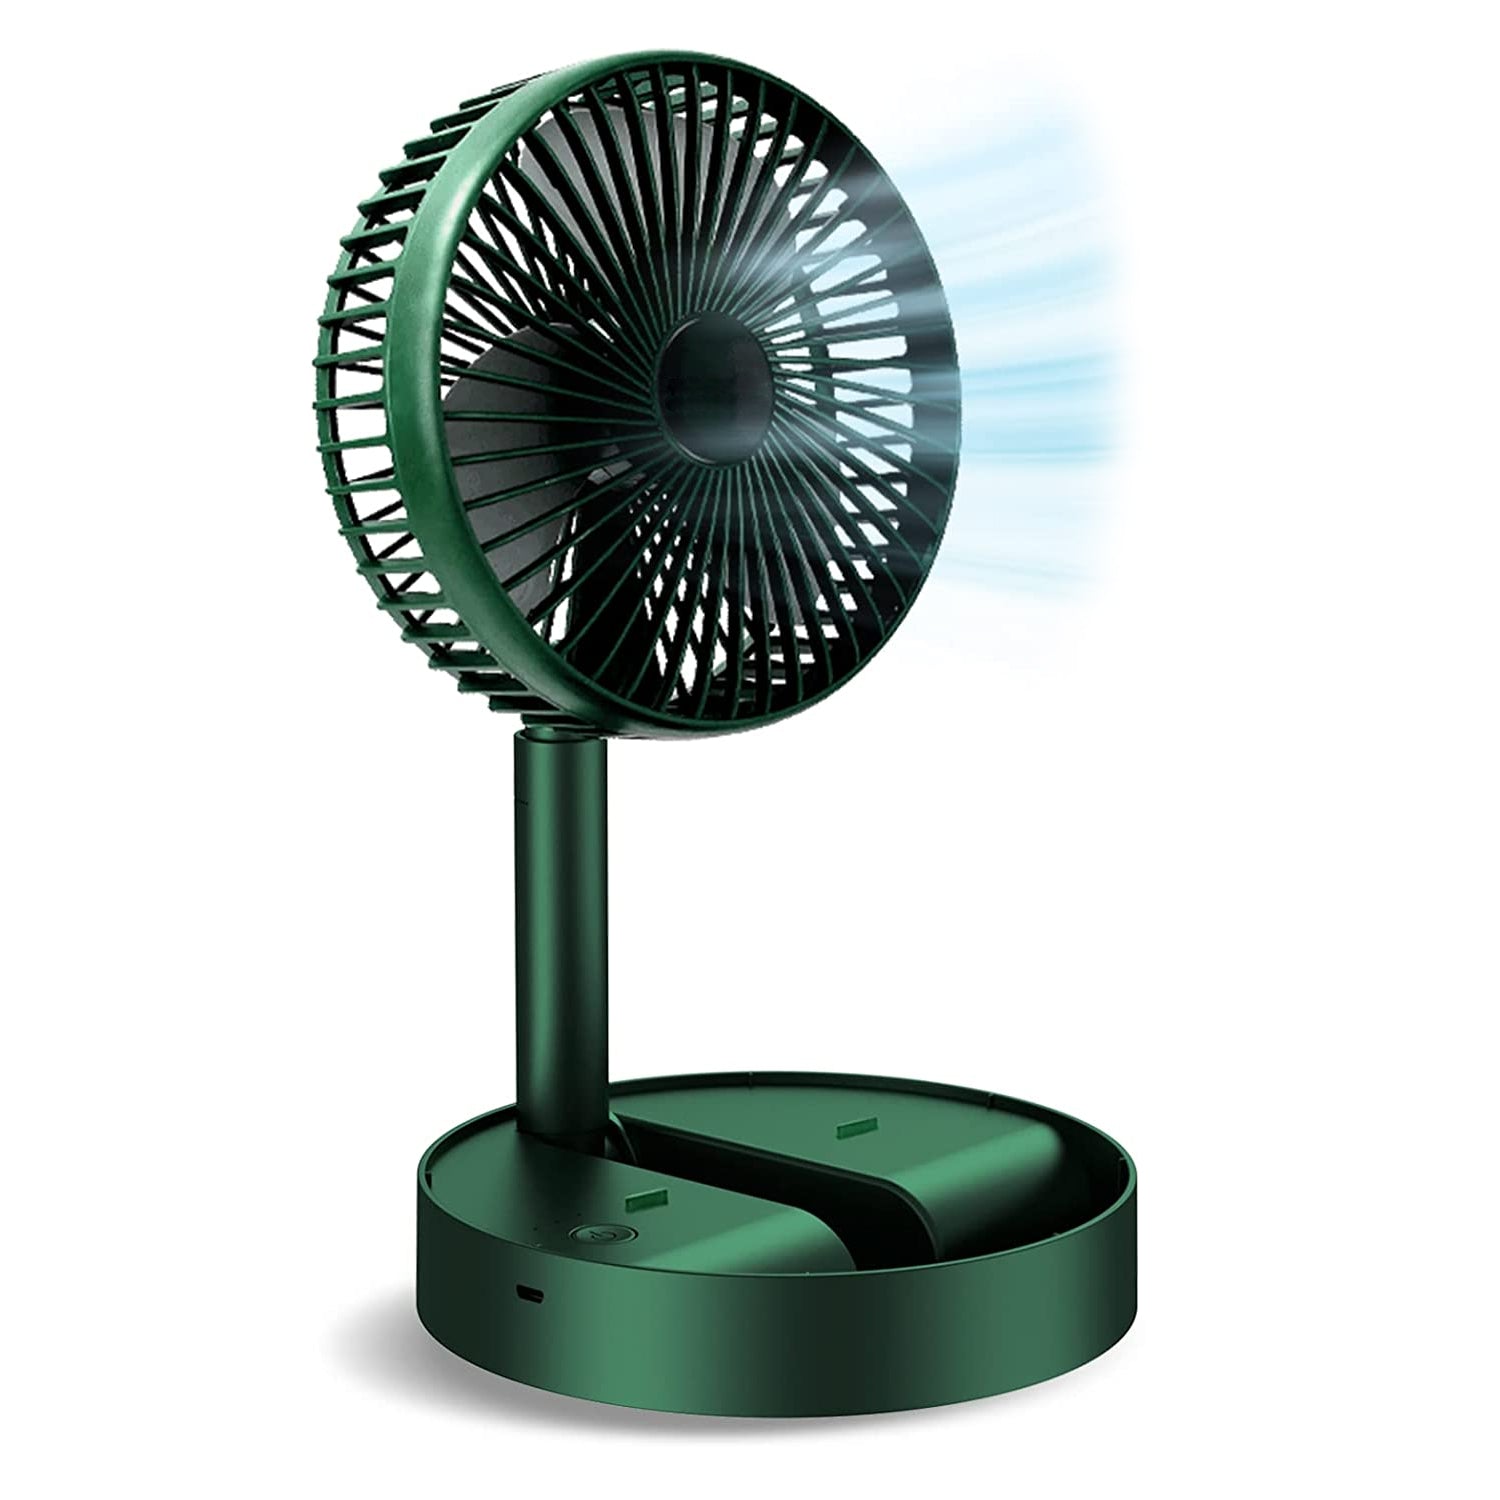 4613 Telescopic Electric Desktop Fan, Height Adjustable, Foldable & Portable for Travel/Carry | Silent Table Top Personal Fan for Bedside, Office Table Dukandaily